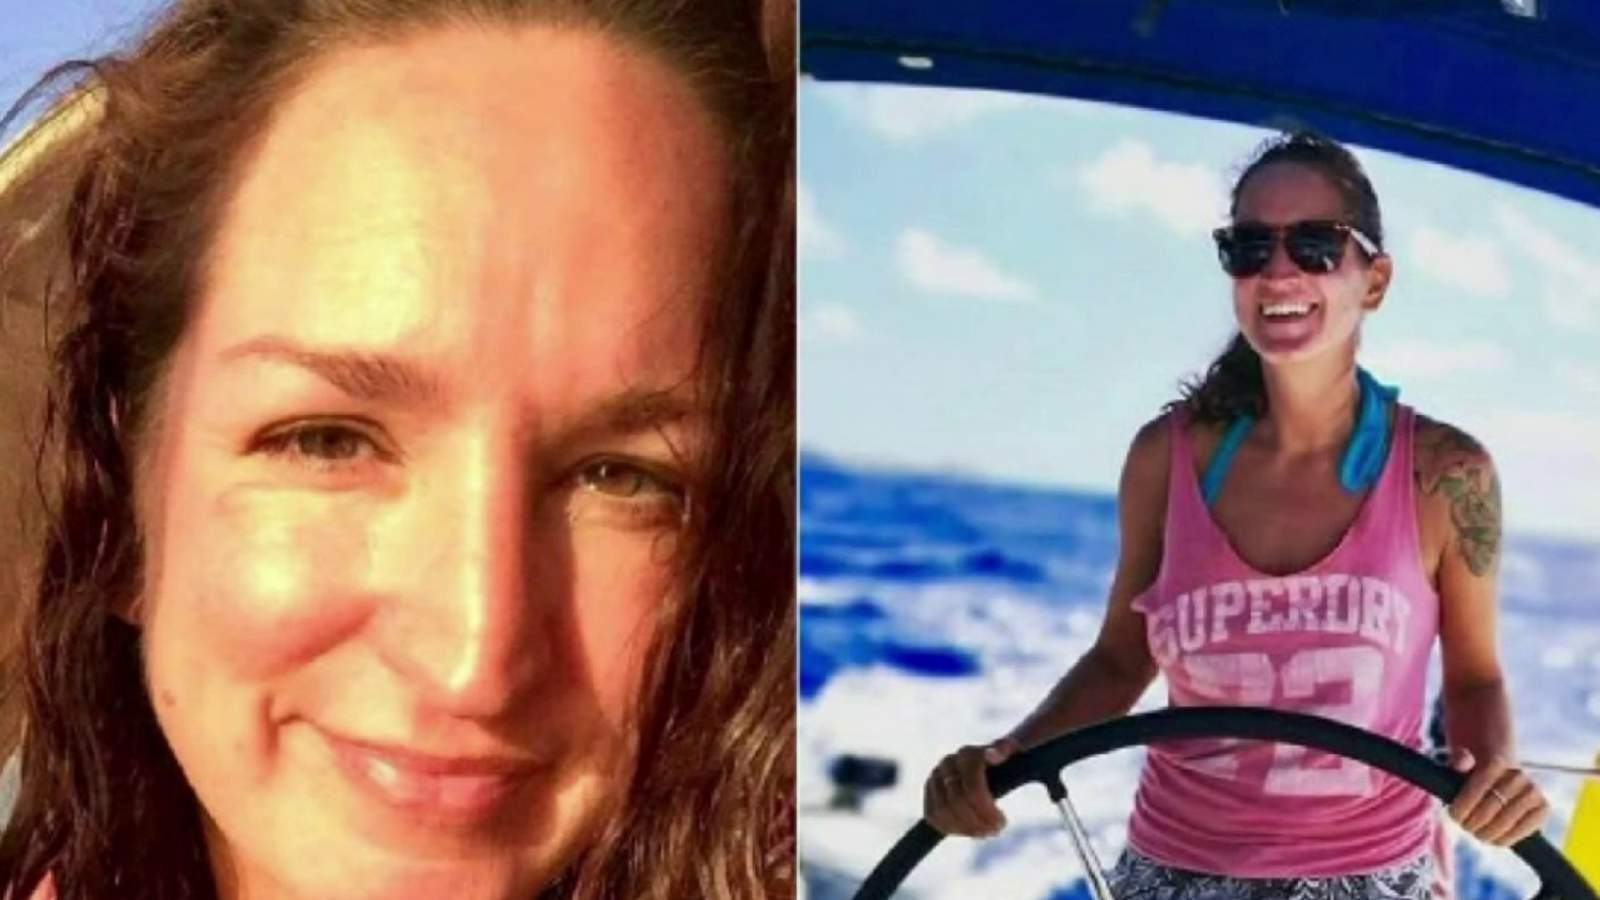 Nightside Report March 24, 2021: Orion Township native at center of search for missing woman in Virgin Islands, Metro Detroit woman warns others after falling victim to elaborate pet purchasing scam